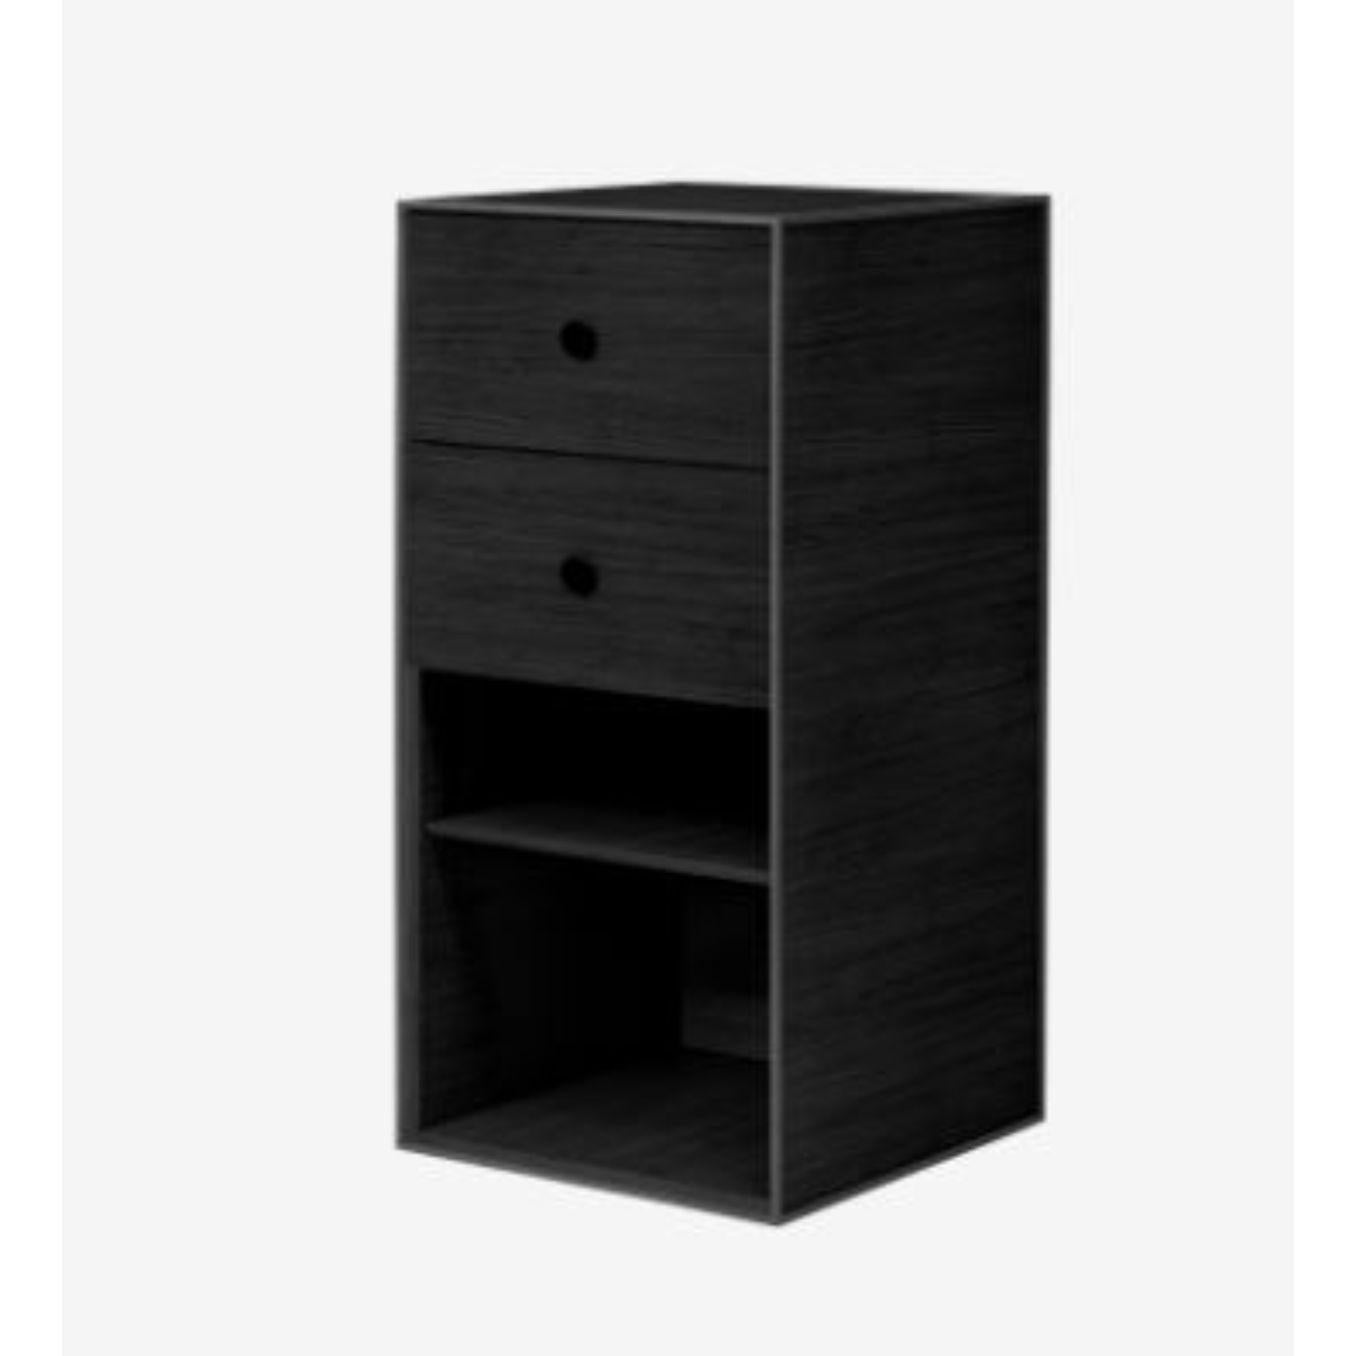 70 black ash frame box with shelf / 2 drawers by Lassen
Dimensions: D 35 x W 35 x H 70 cm 
Materials: Finér, melamin, melamin, melamine, metal, veneer, ash
Also available in different colors and dimensions. 
Weight: 13 kg


By Lassen is a